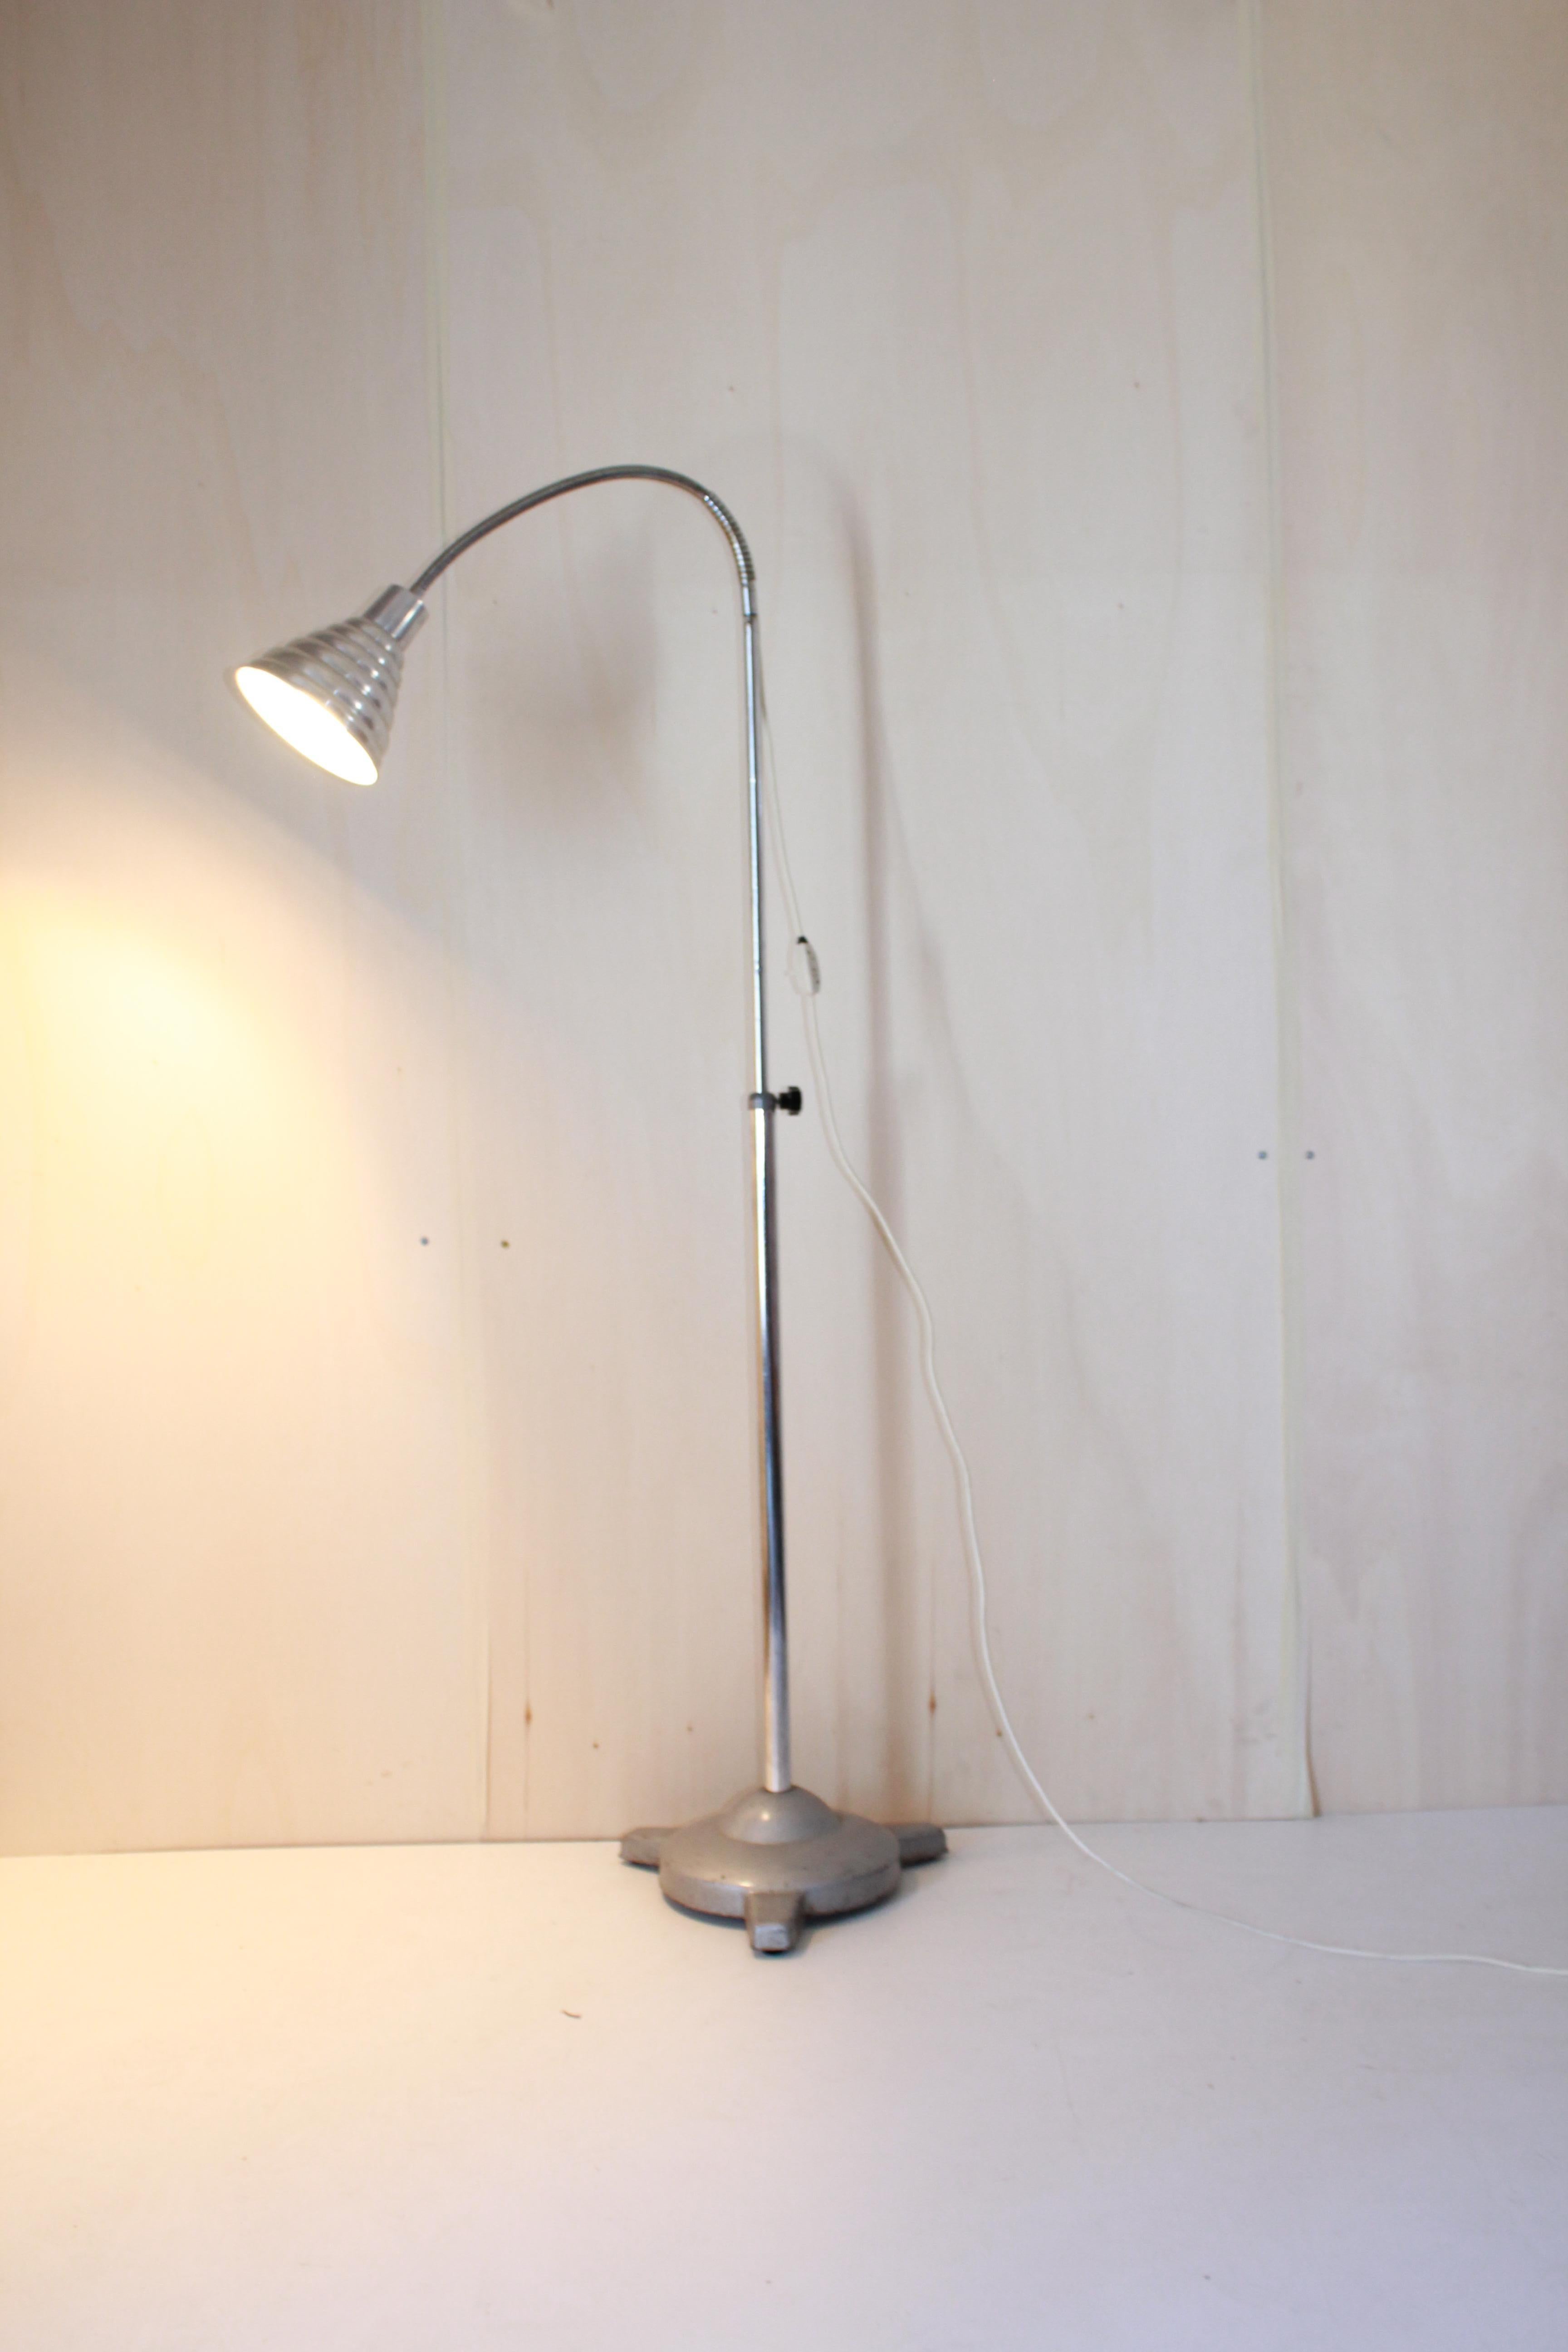 Vintage flexible Floor Lamp, Industriak style, Italy 1960s
A cosy 1960's industrial floor lamp with flexible light spot and adjustable iron pole. Model of lamp usually used in doctor studios.

E 27 light bulb. In very good conditions with only few